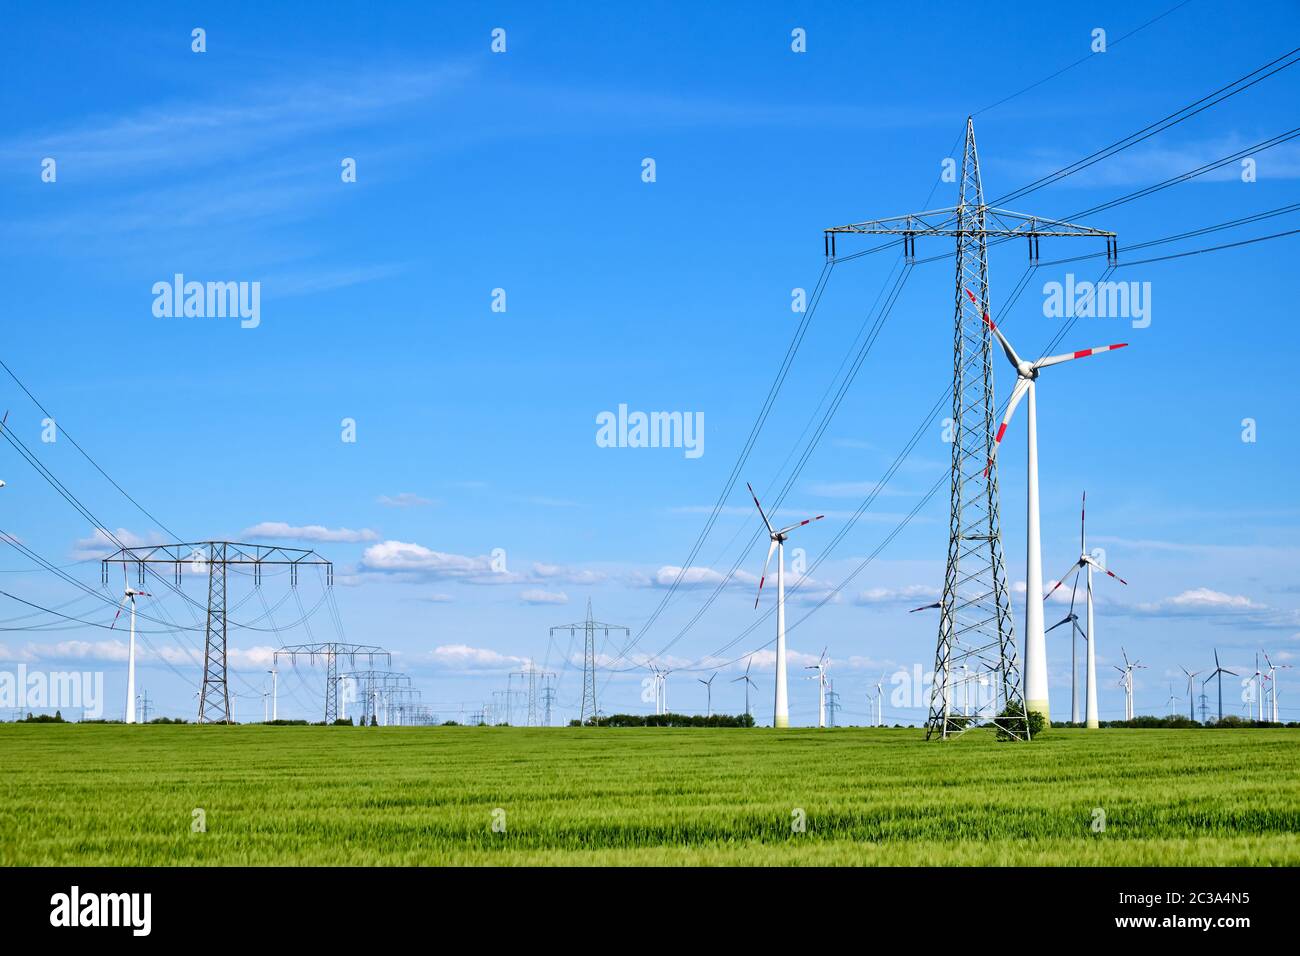 Wind power plants and overhead power lines seen in Germany Stock Photo